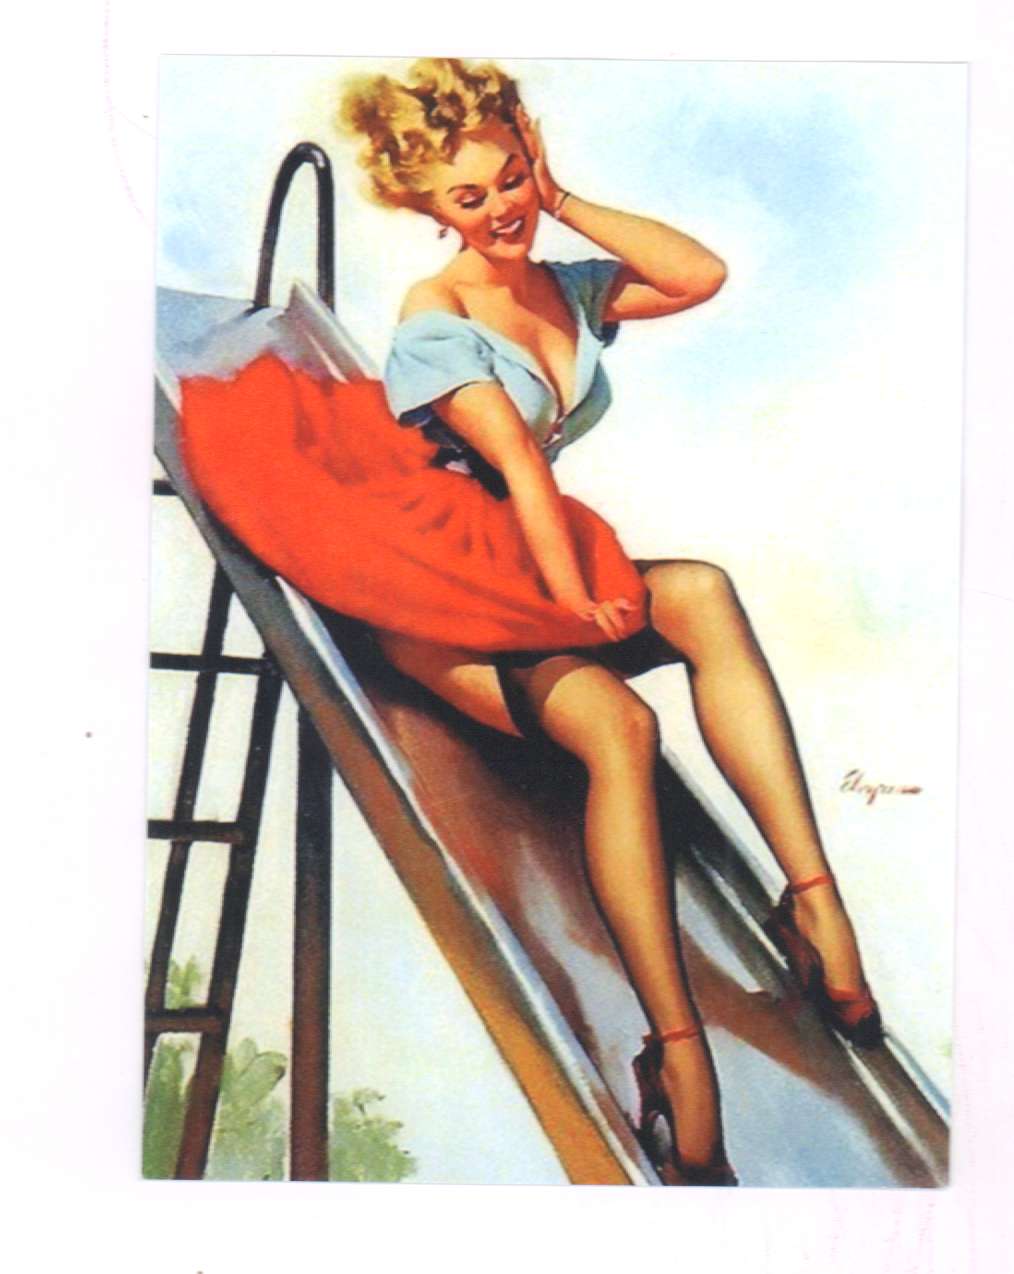 Support pin up t me pinup01. Художник Джил Элвгрен. Художник Джил Элвгрен (Gil Elvgren). Pin-up — художник Джил Элвгрен. Джил Элвгрен 1961.